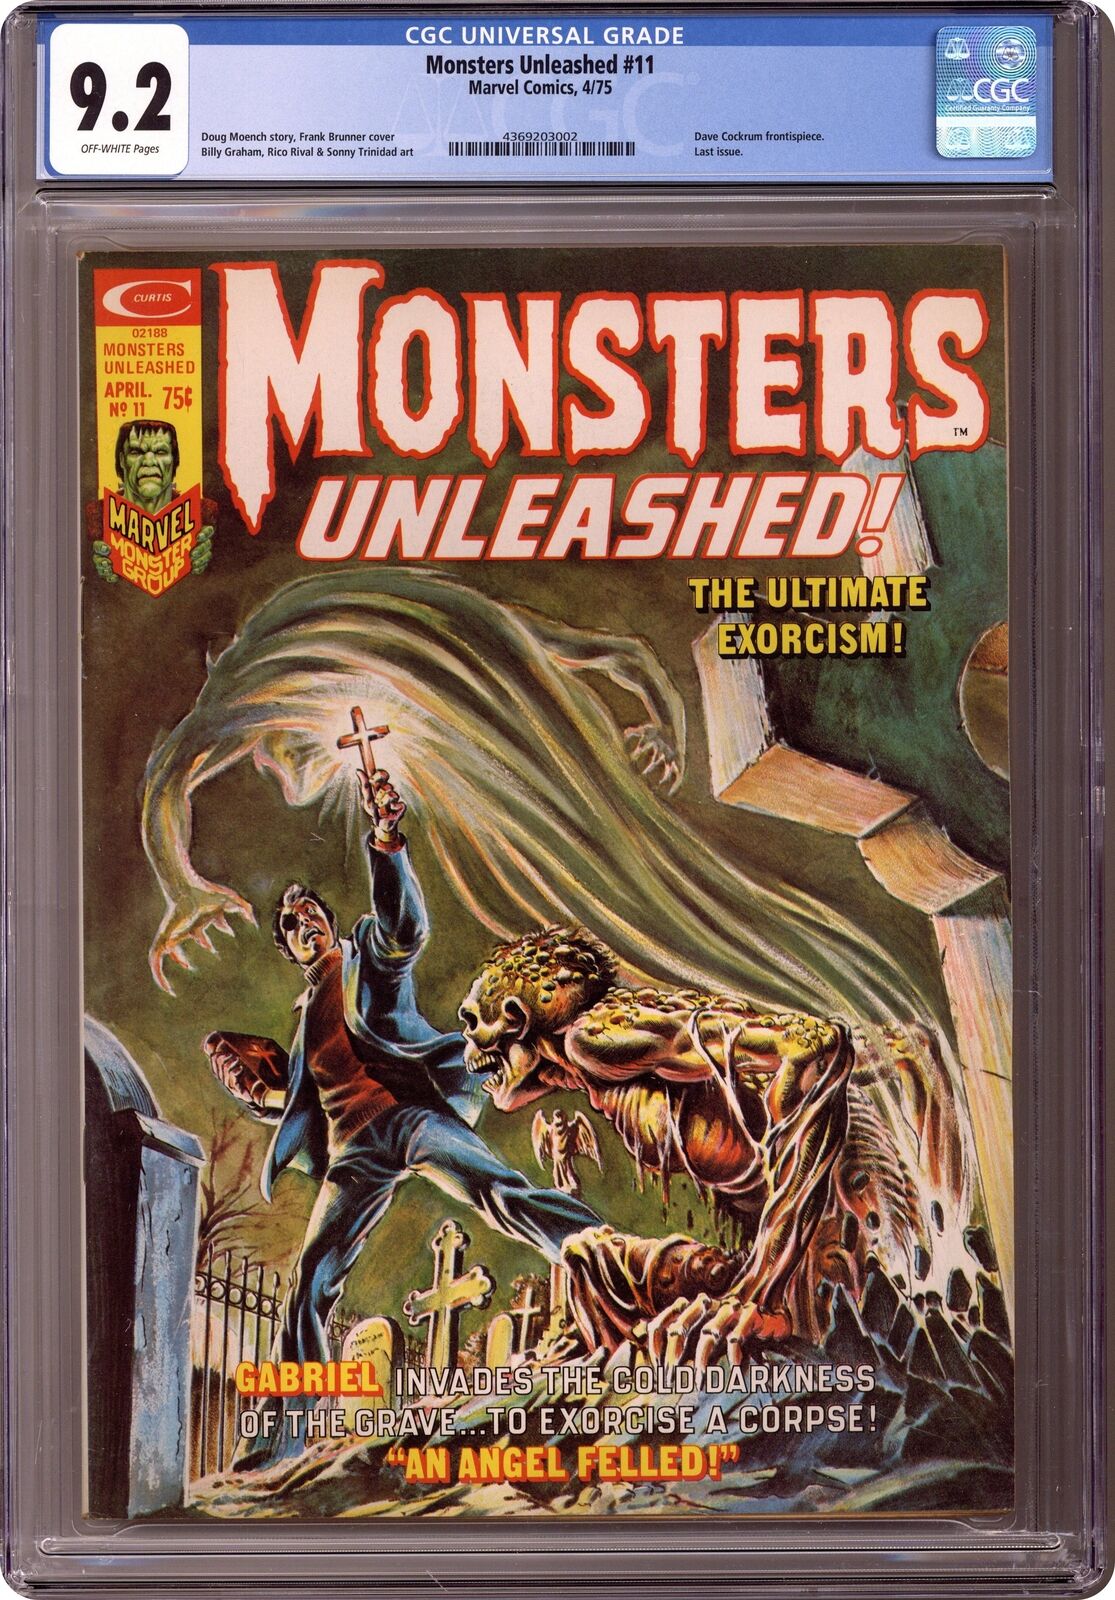 Monsters Unleashed #11 CGC 9.2 1975 4369203002